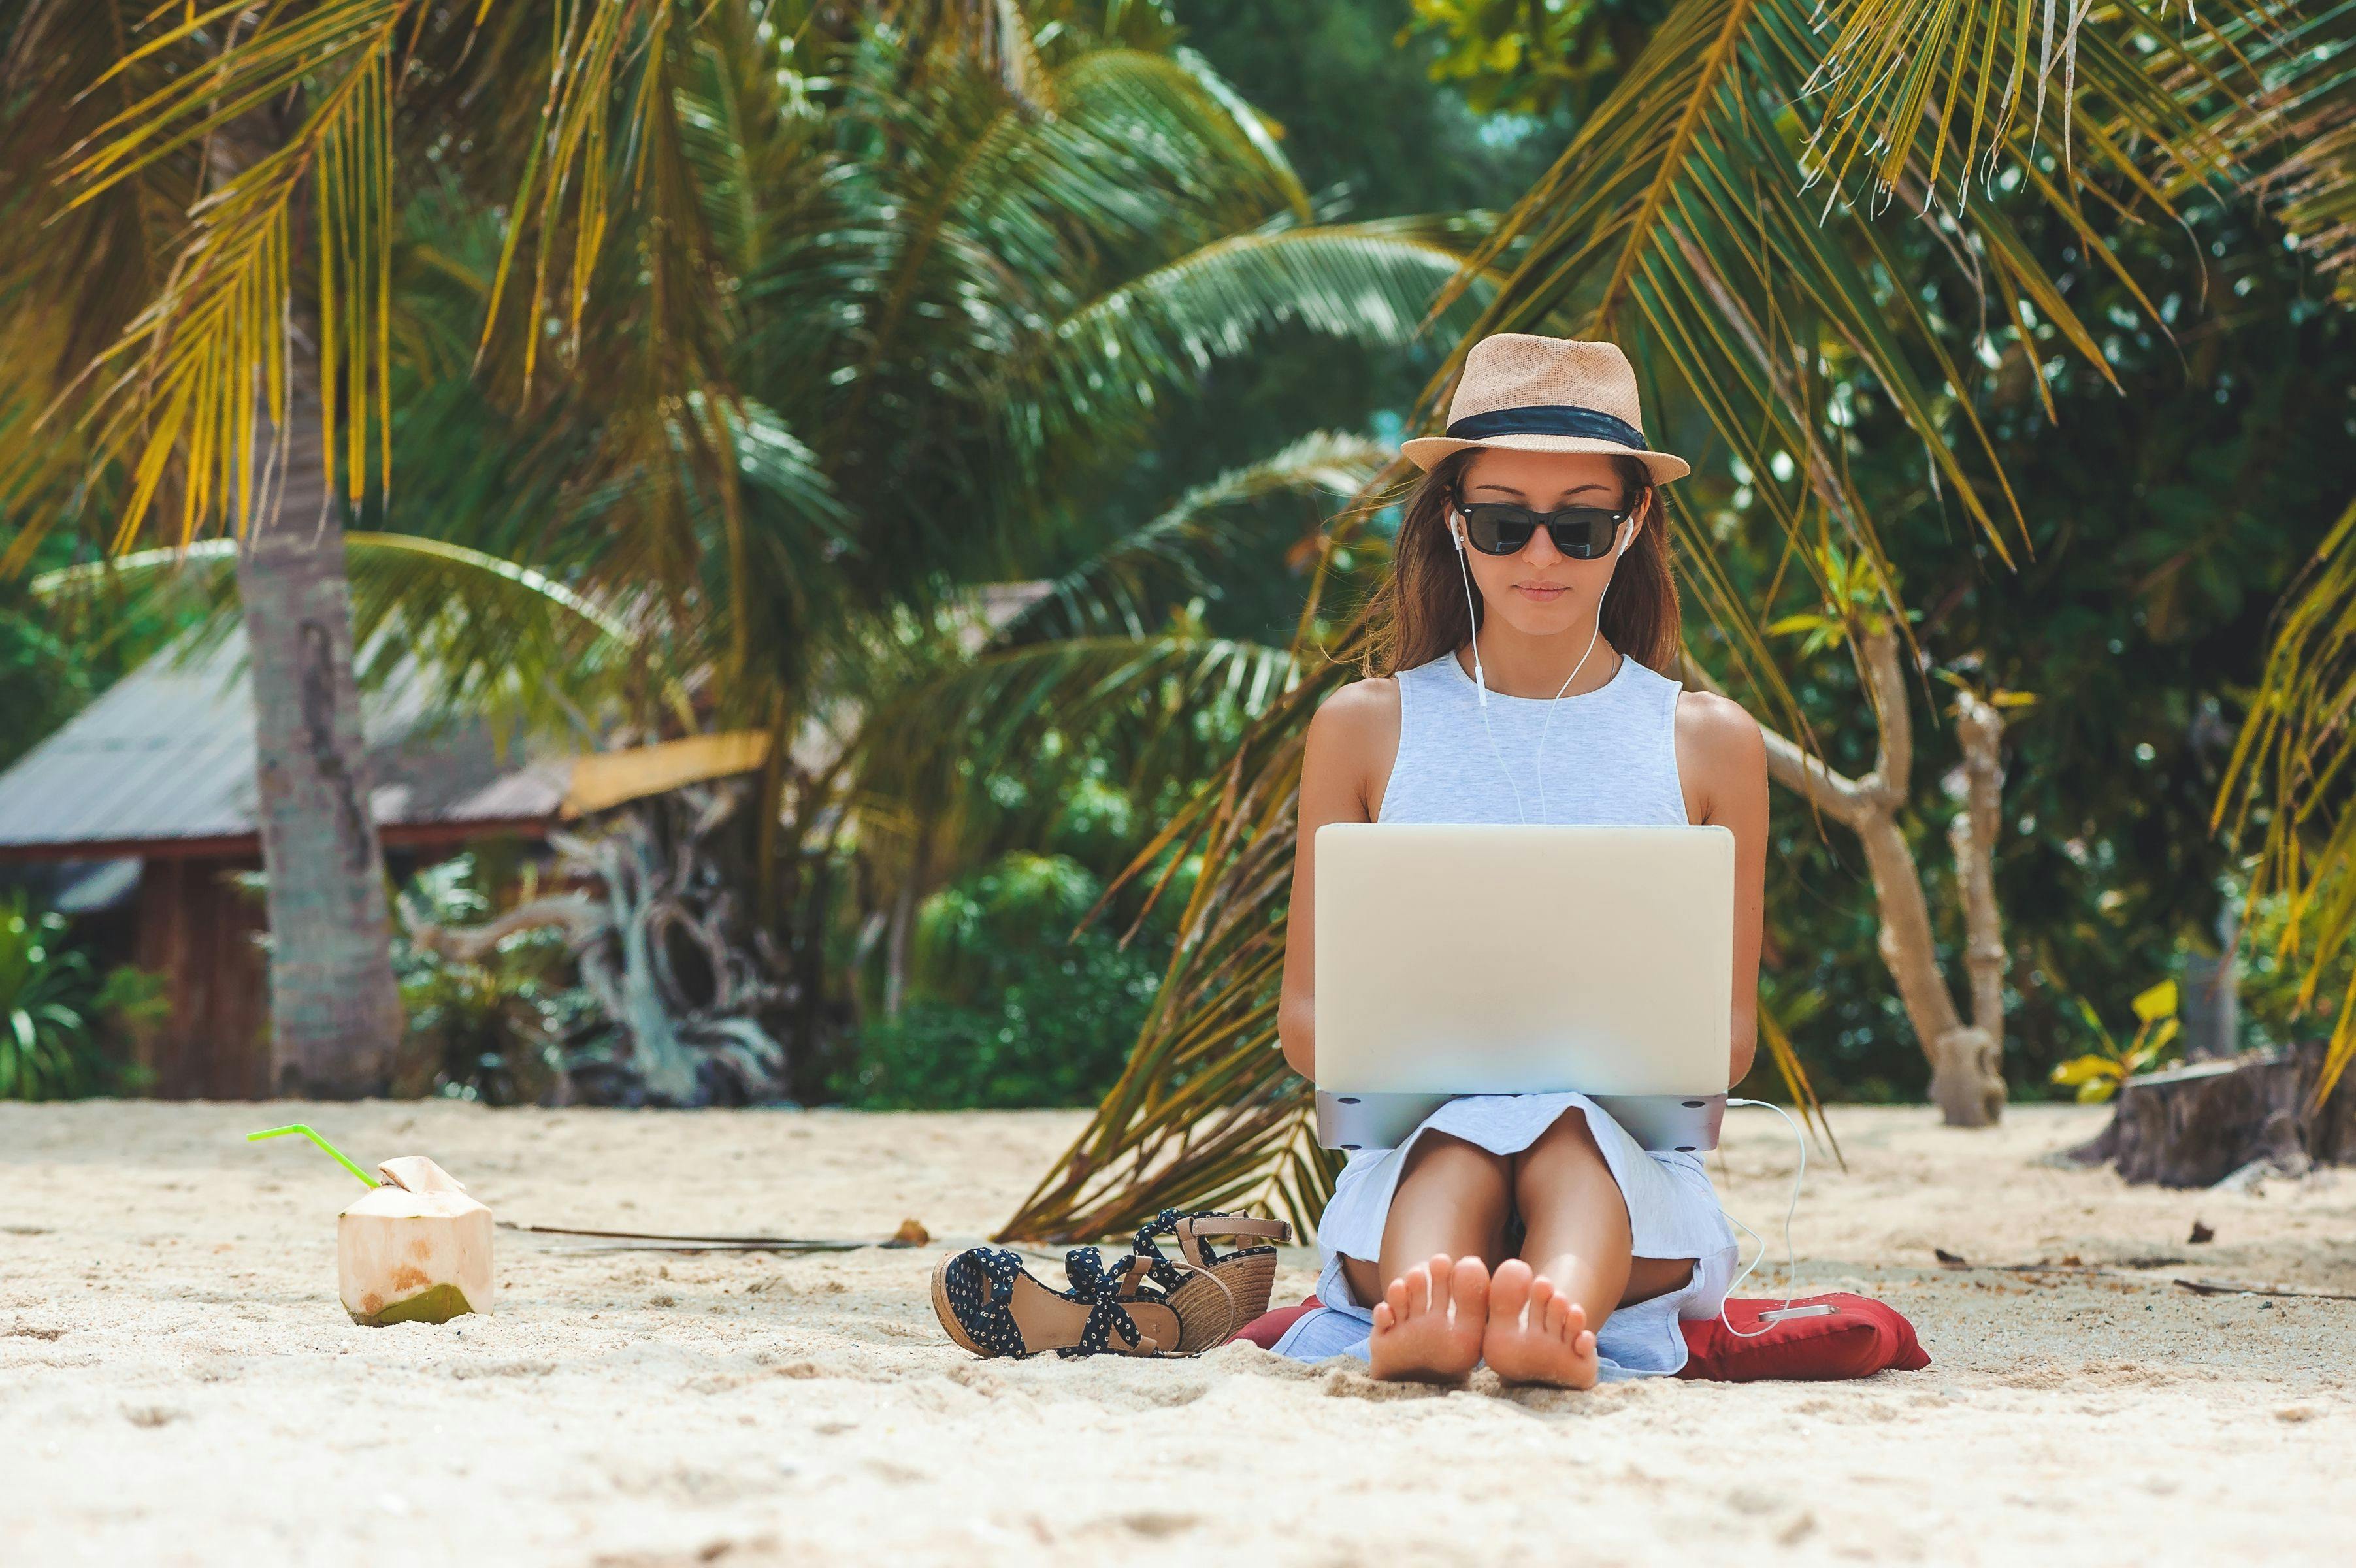 A person sitting on a beach while busy on their laptop with palm trees and a wooden building in the background.